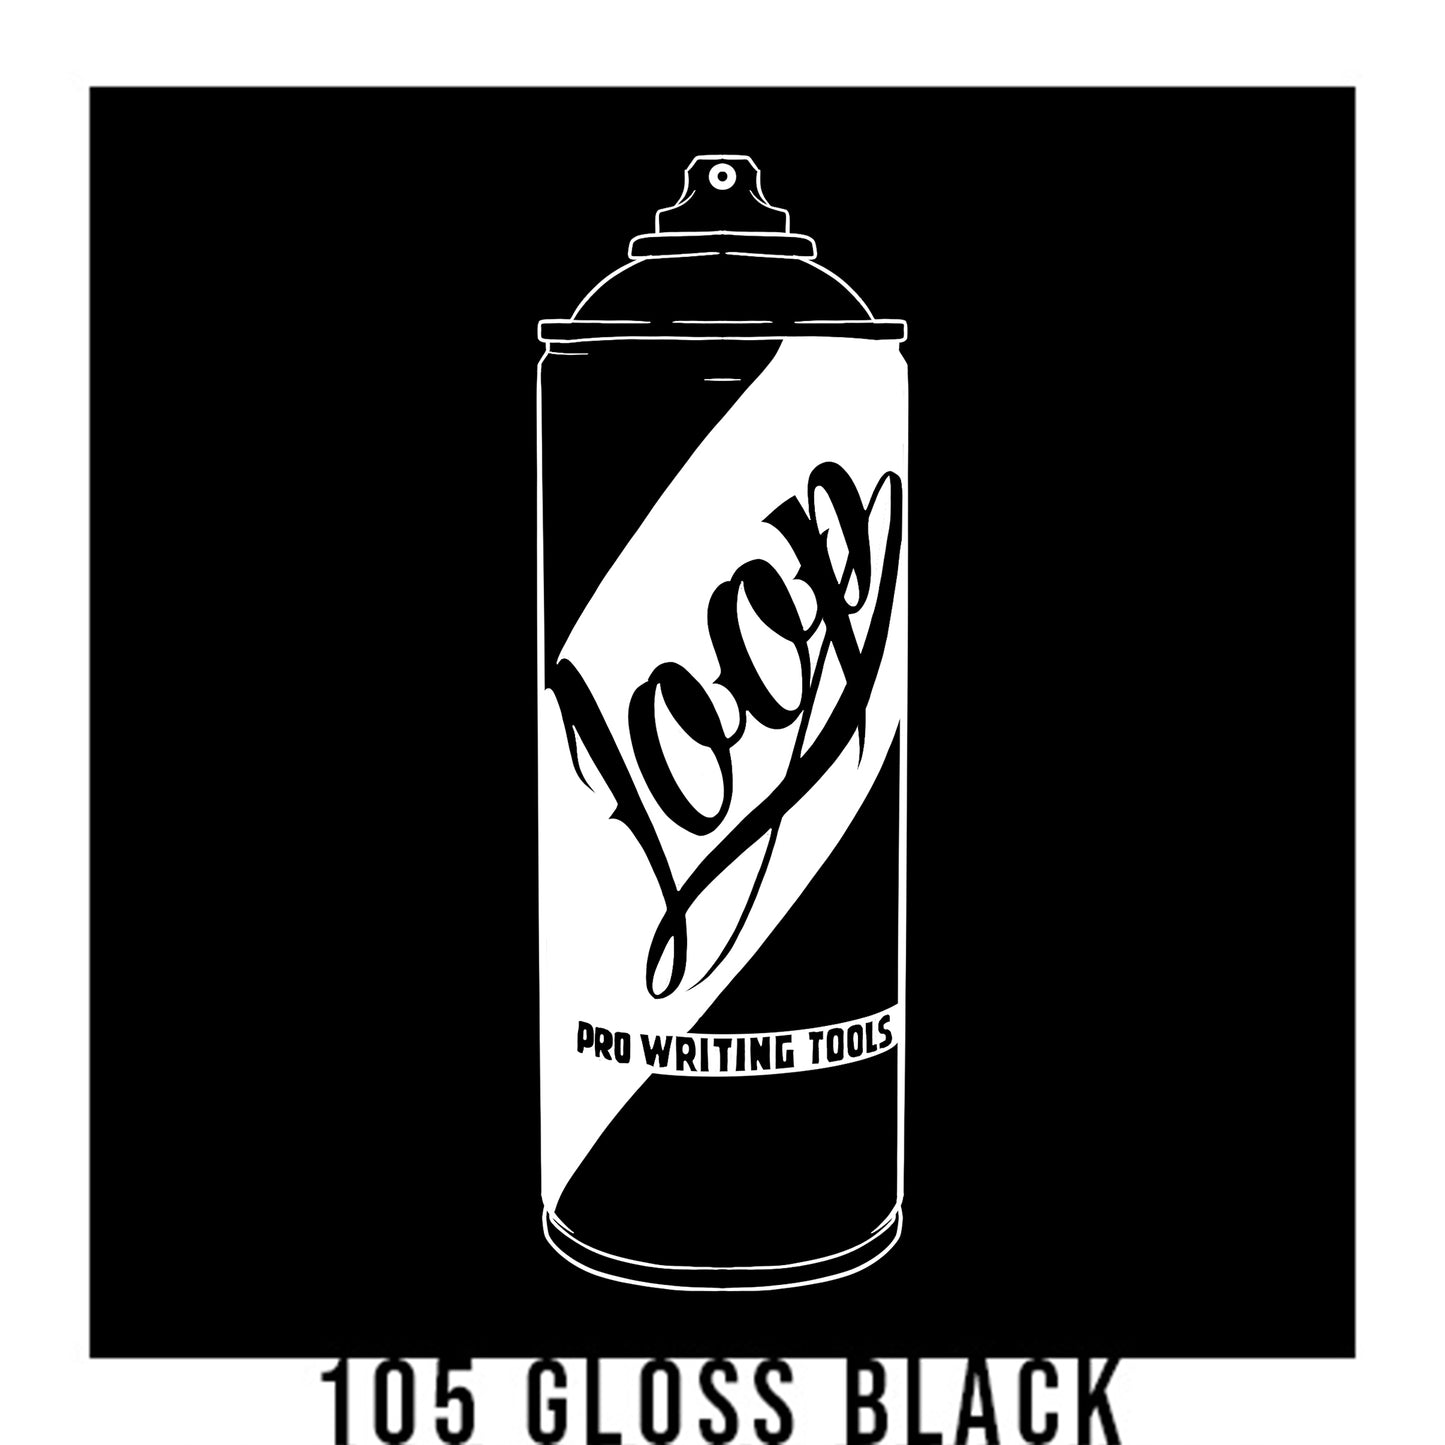 A white outline drawing of a black spray paint can with the word "Loop" written on the face in script. The background is a black color swatch with a white border with the words "105 Gloss Black" at the bottom.